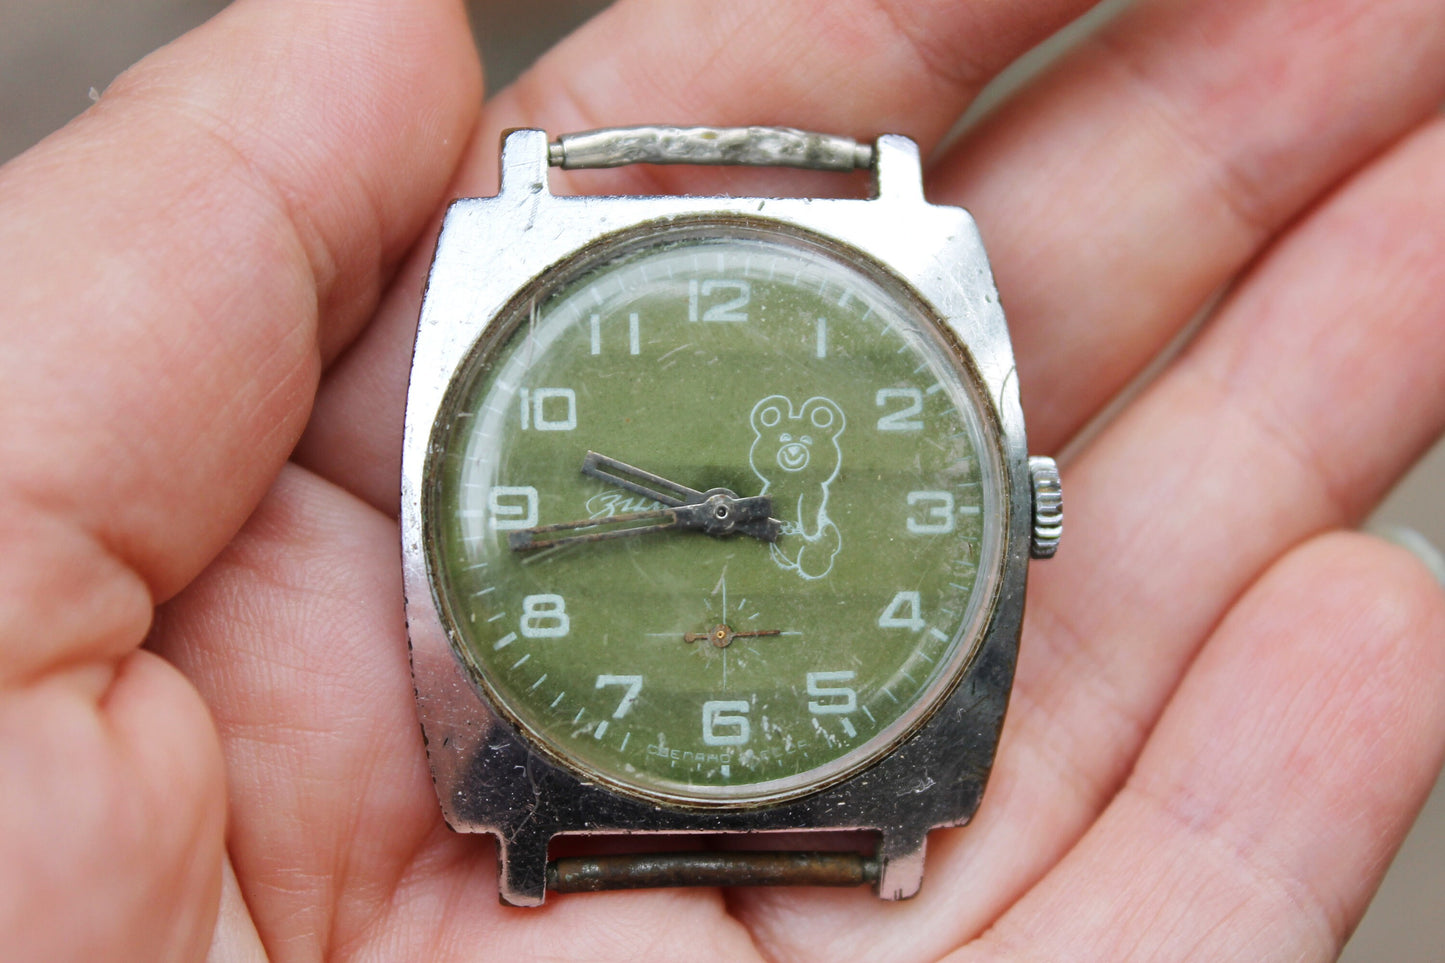 Vintage ussr ZIM watches - Olympic bear - Stainless Steel Vintage Watch from Soviet Union - NOT WORKING - without band